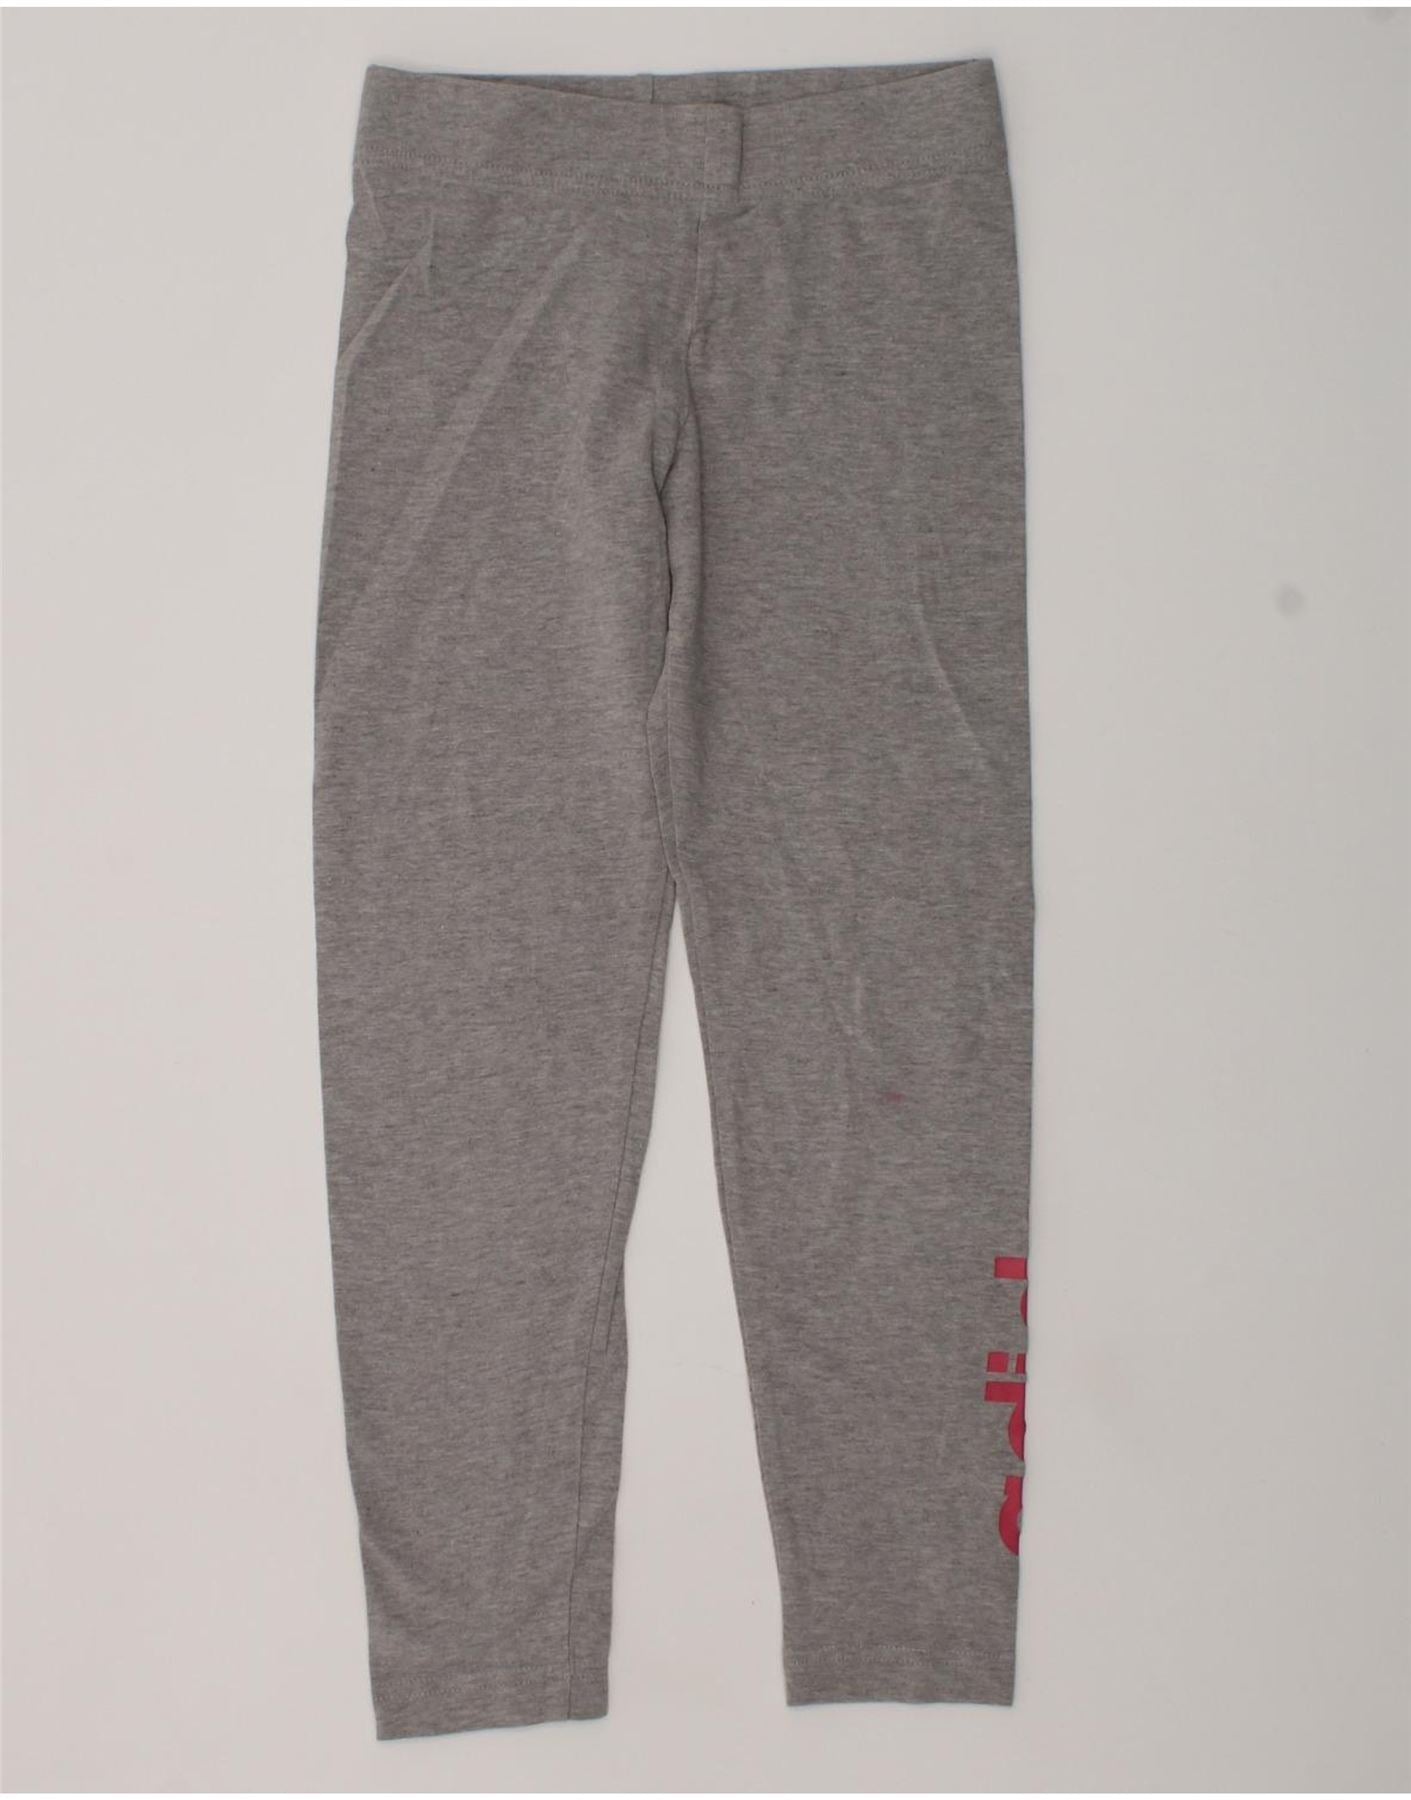 ADIDAS Girls Graphic Leggings 7-8 Years Grey Cotton, Vintage & Second-Hand  Clothing Online